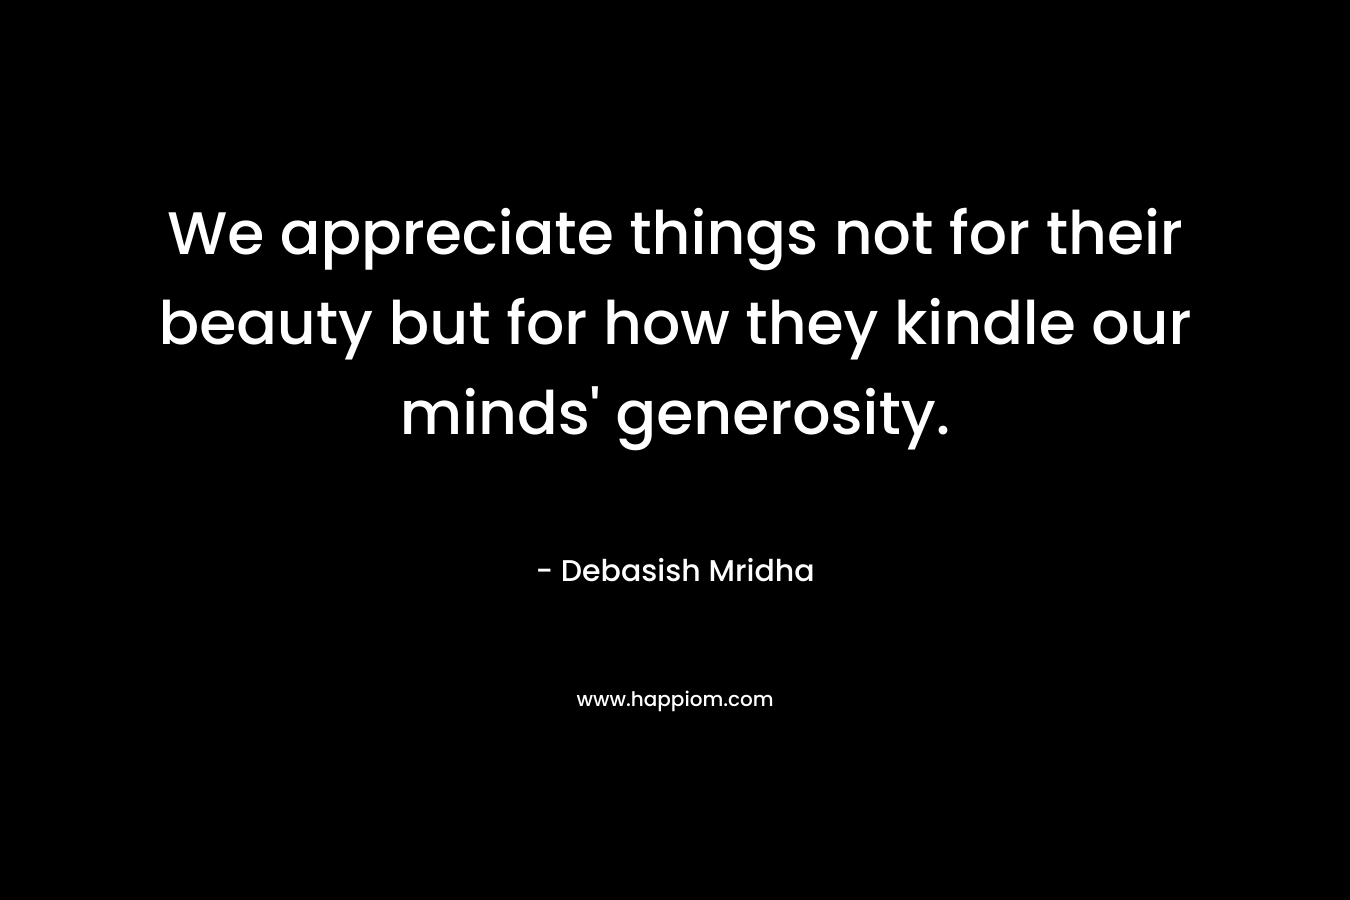 We appreciate things not for their beauty but for how they kindle our minds' generosity.